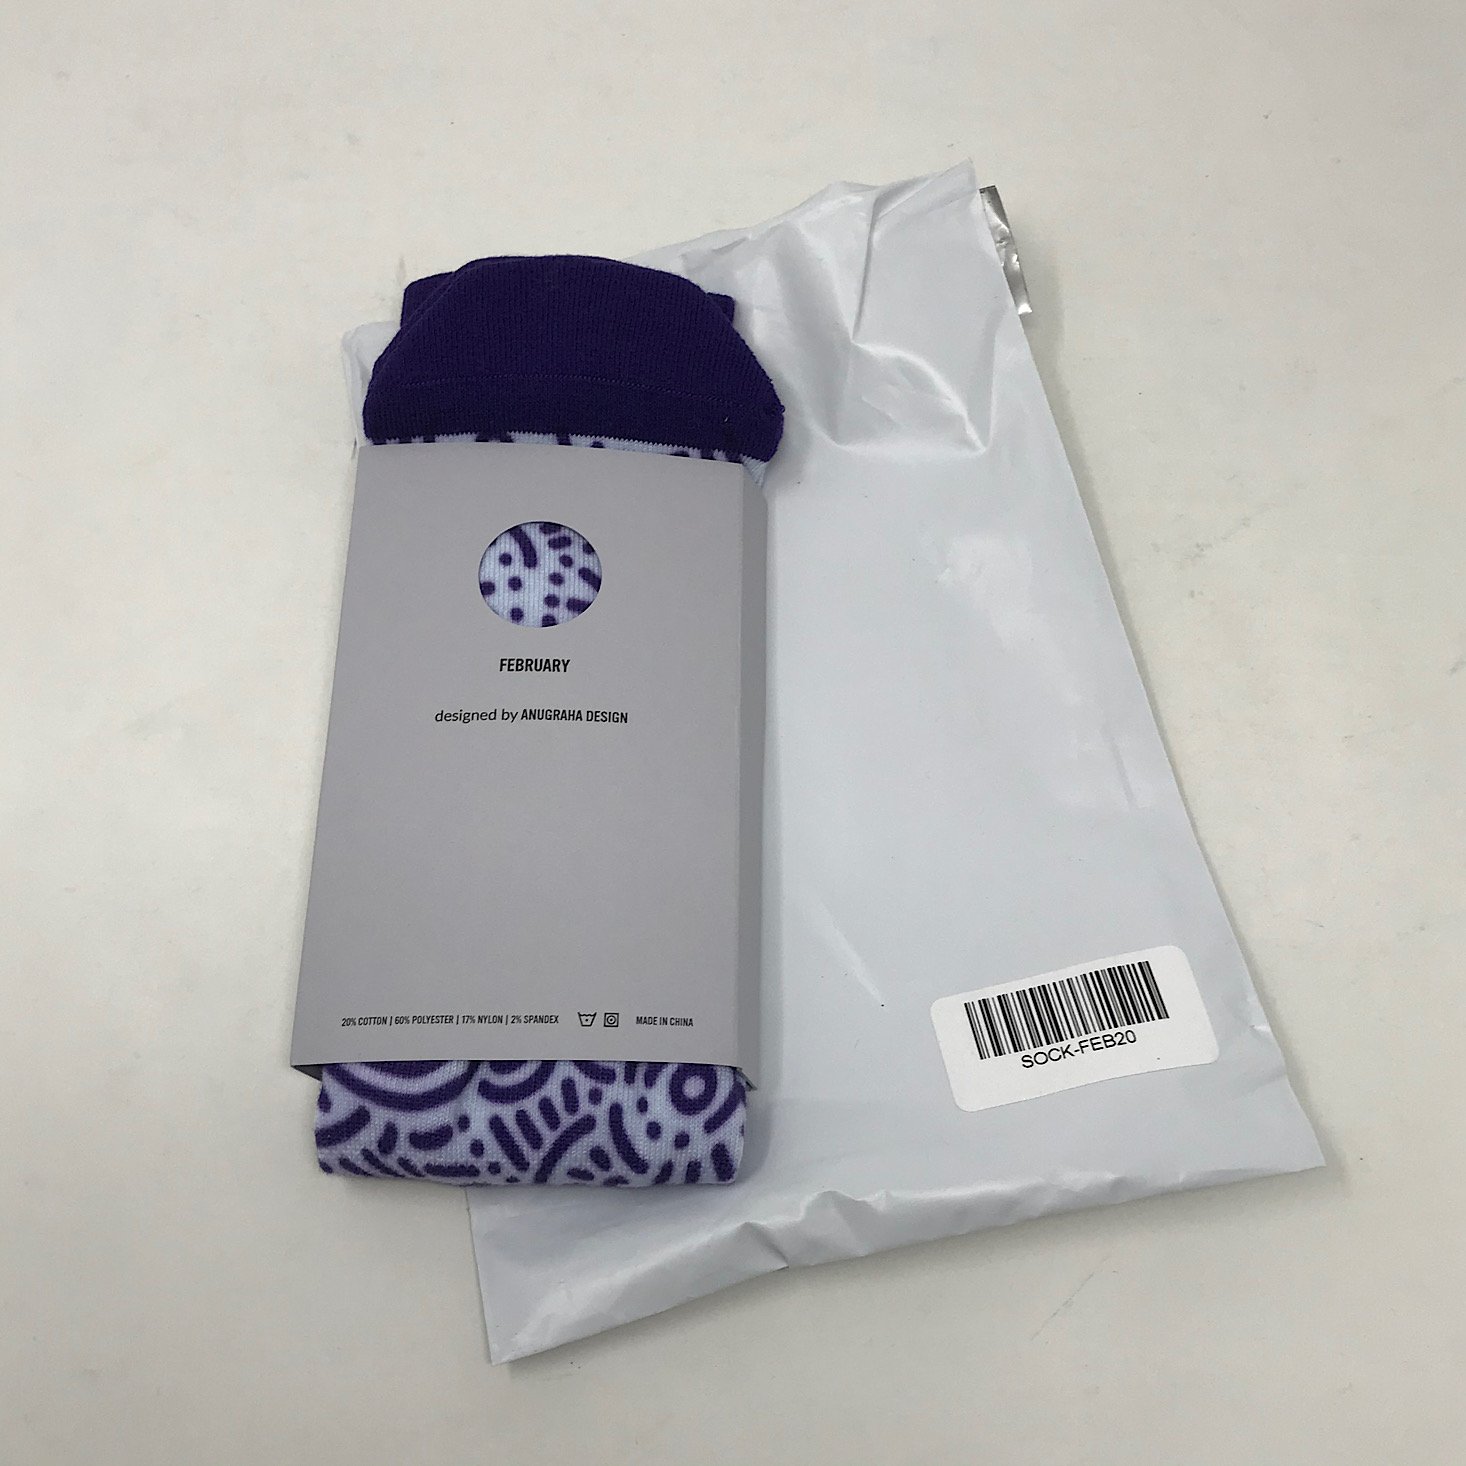 Wohven Socks Subscription Review - February 2020 | MSA